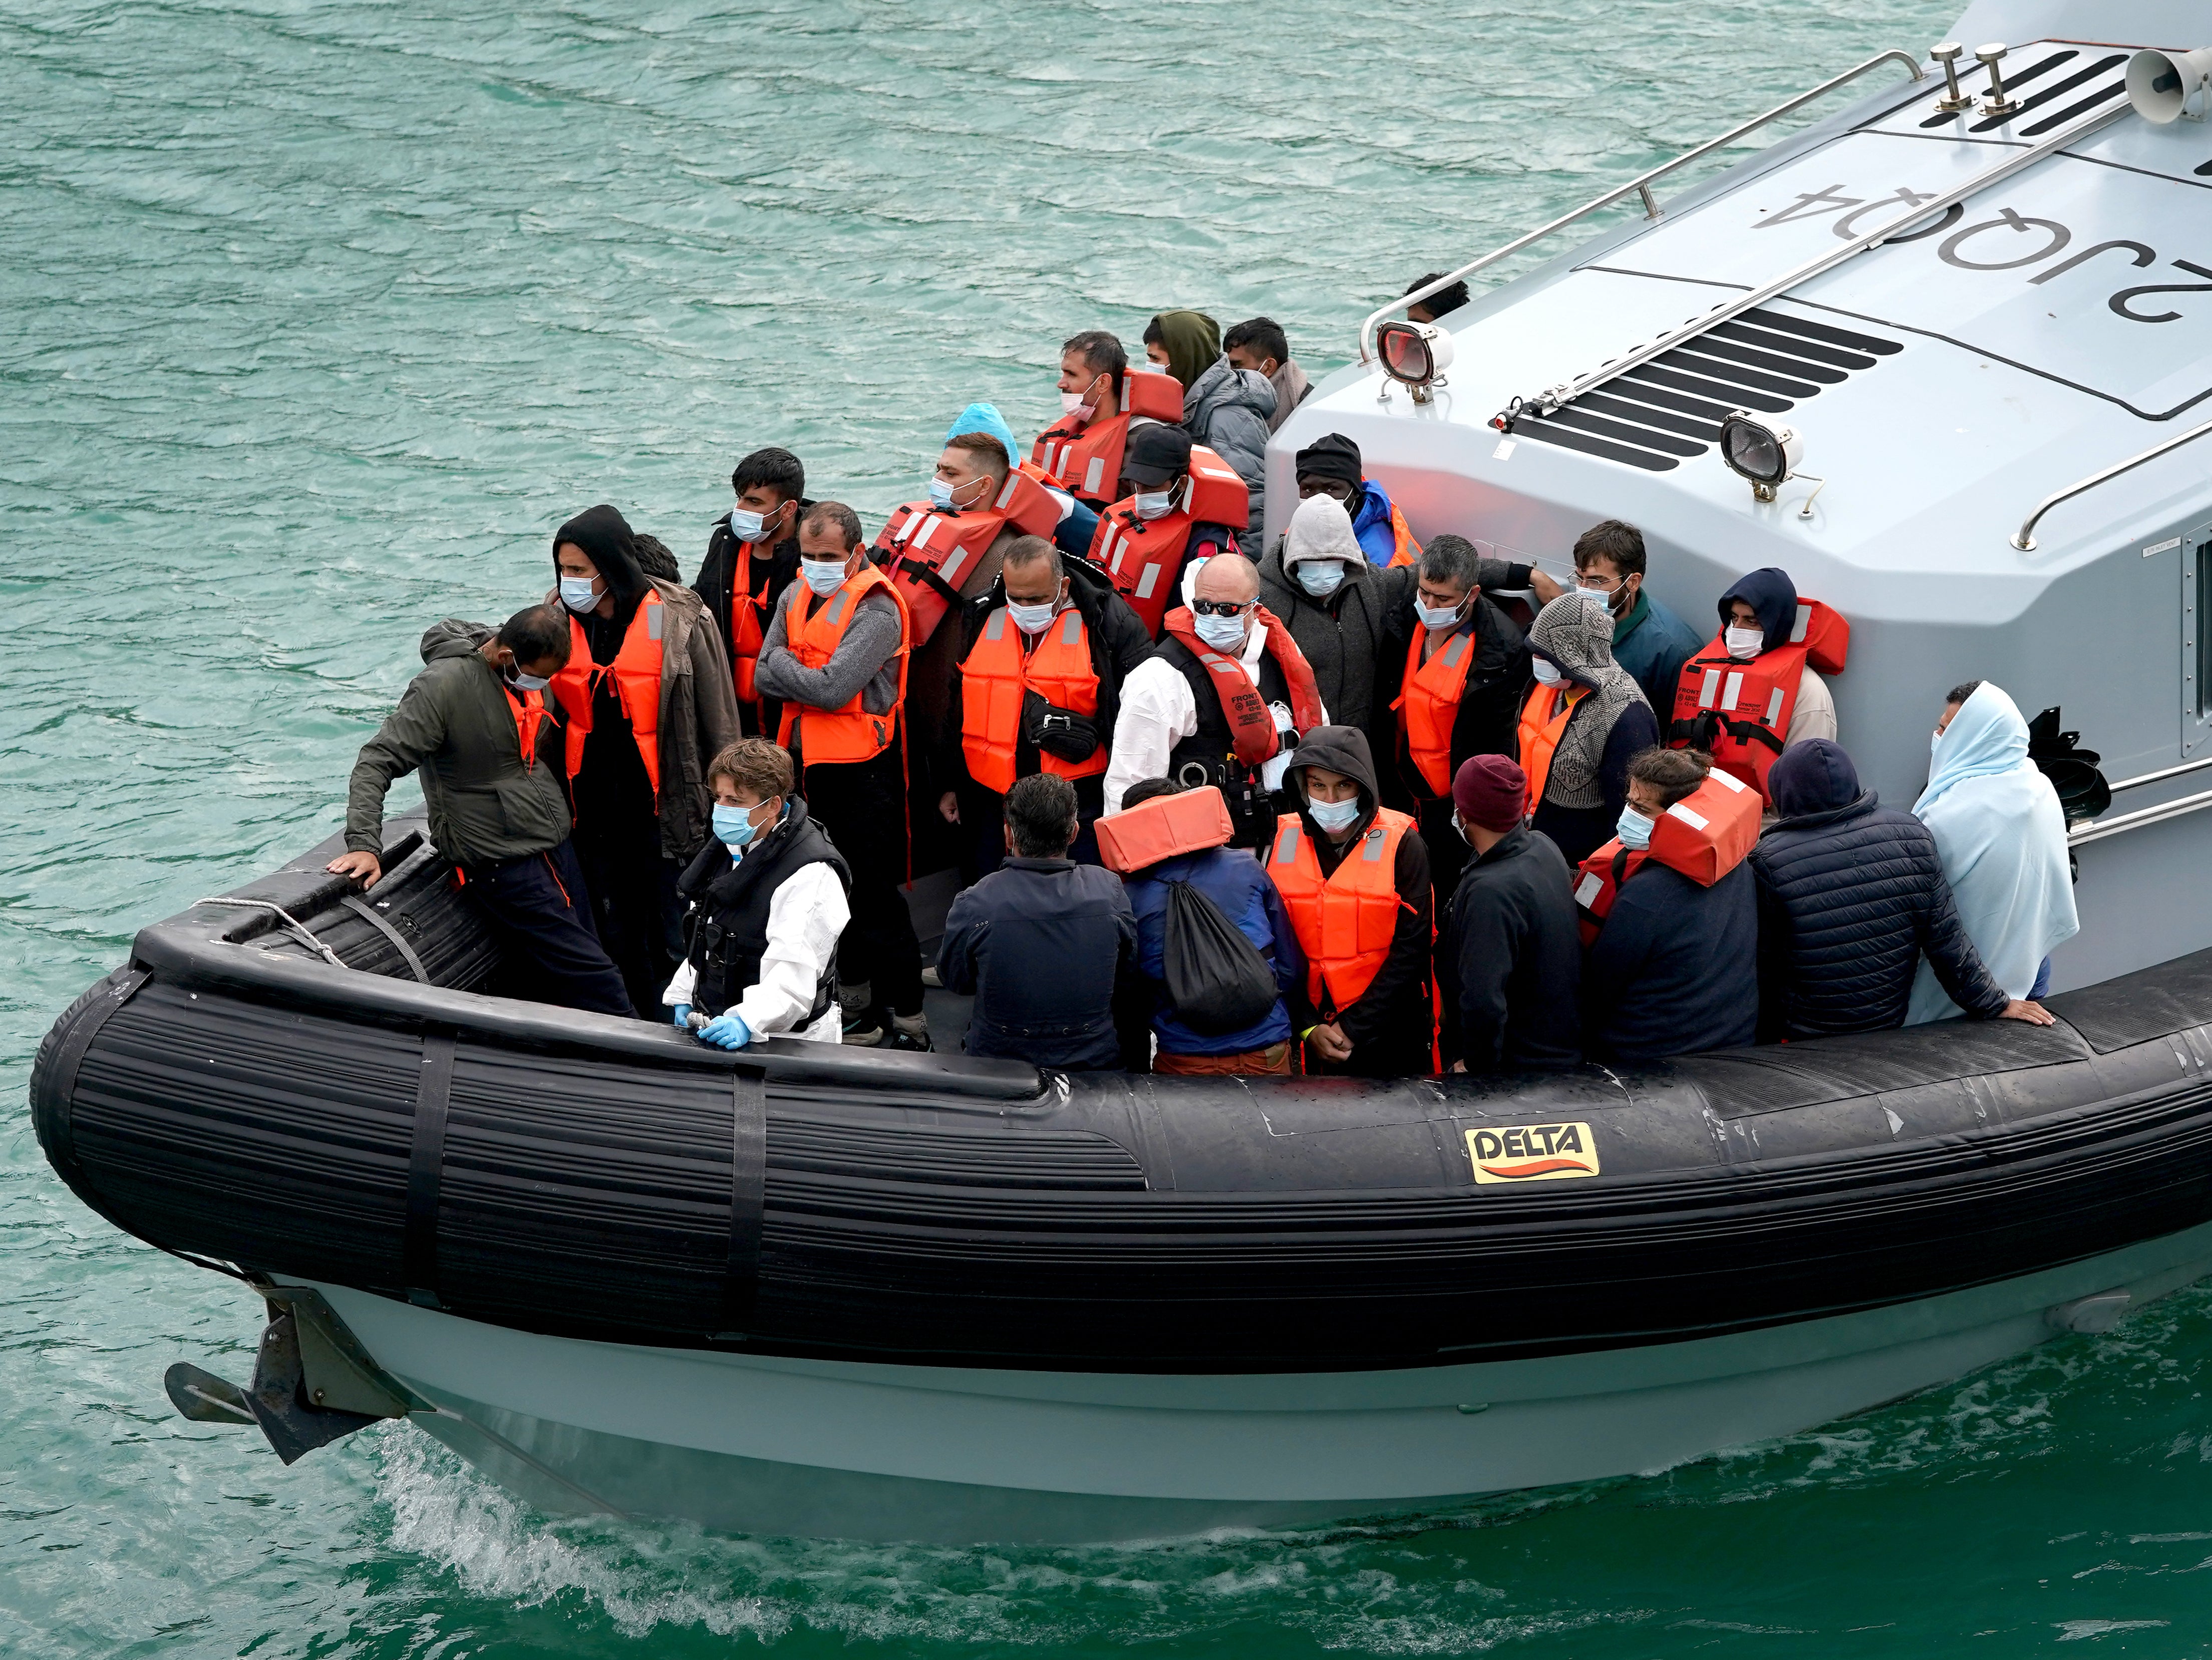 A group of people thought to be migrants brought into Dover by Border Force officers